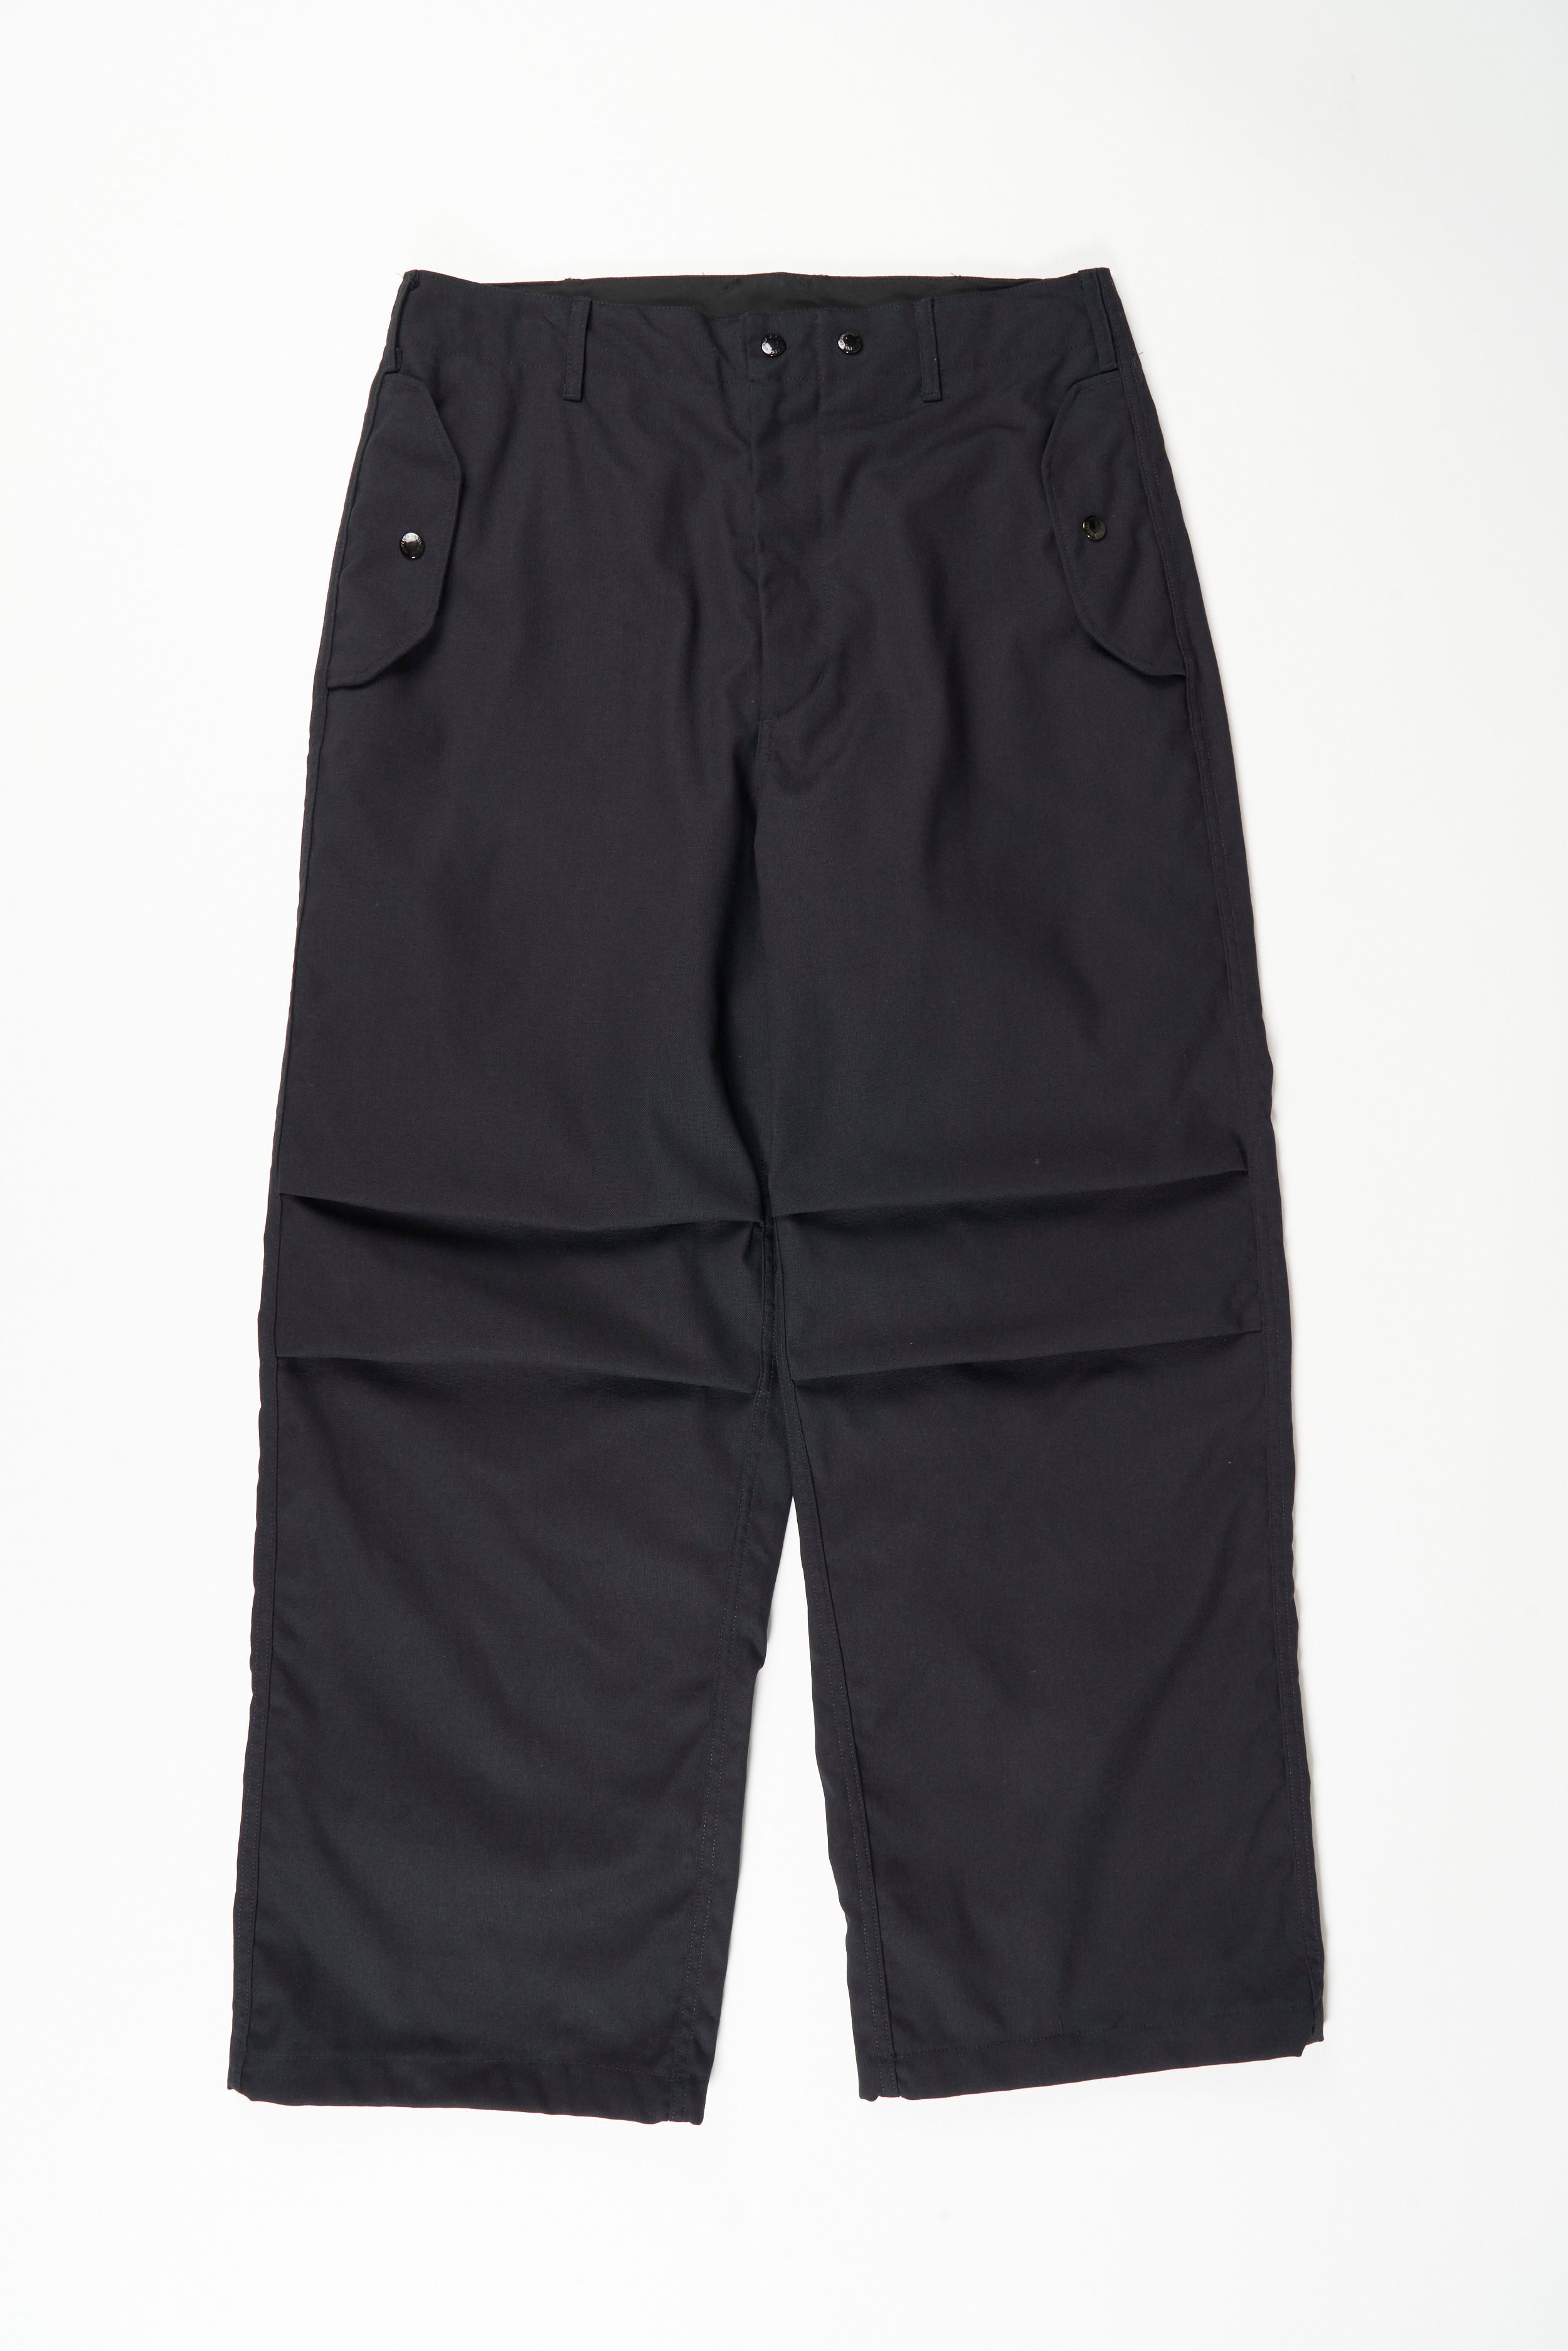 Over Pant - Dk. Navy PC Hopsack